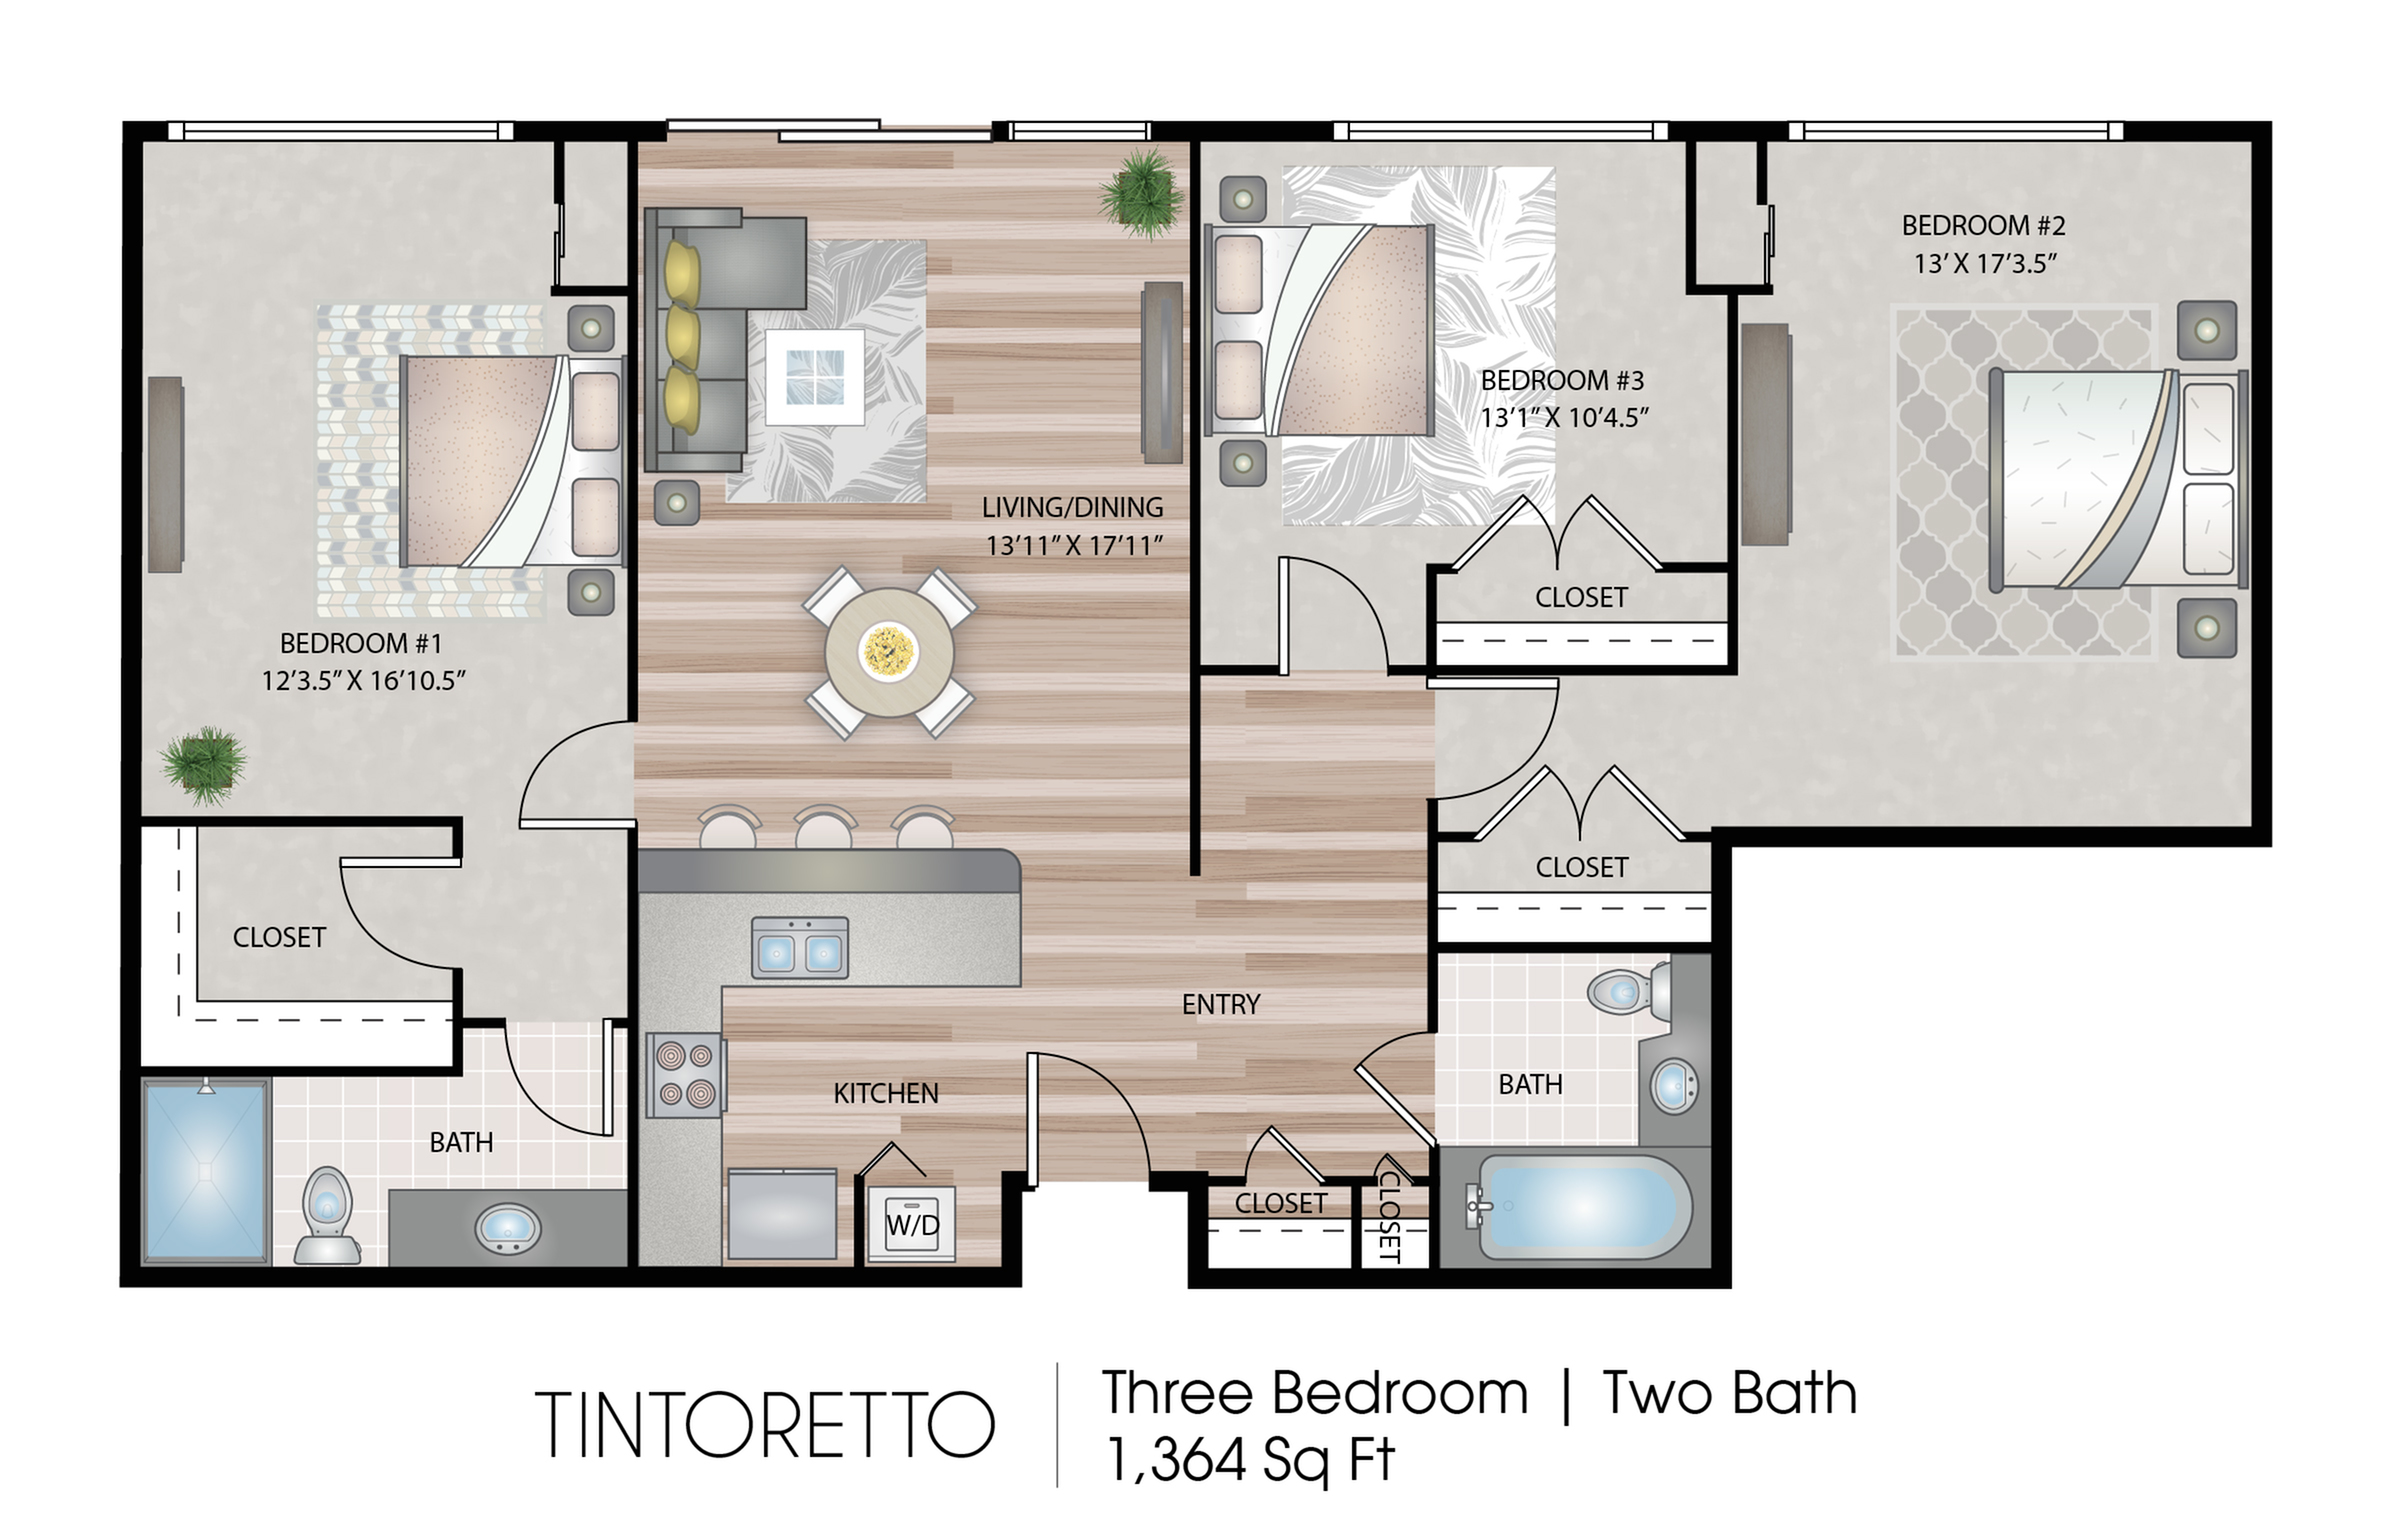 3 Bedroom Apartment Floor Plan With Dimensions Pdf Home Alqu